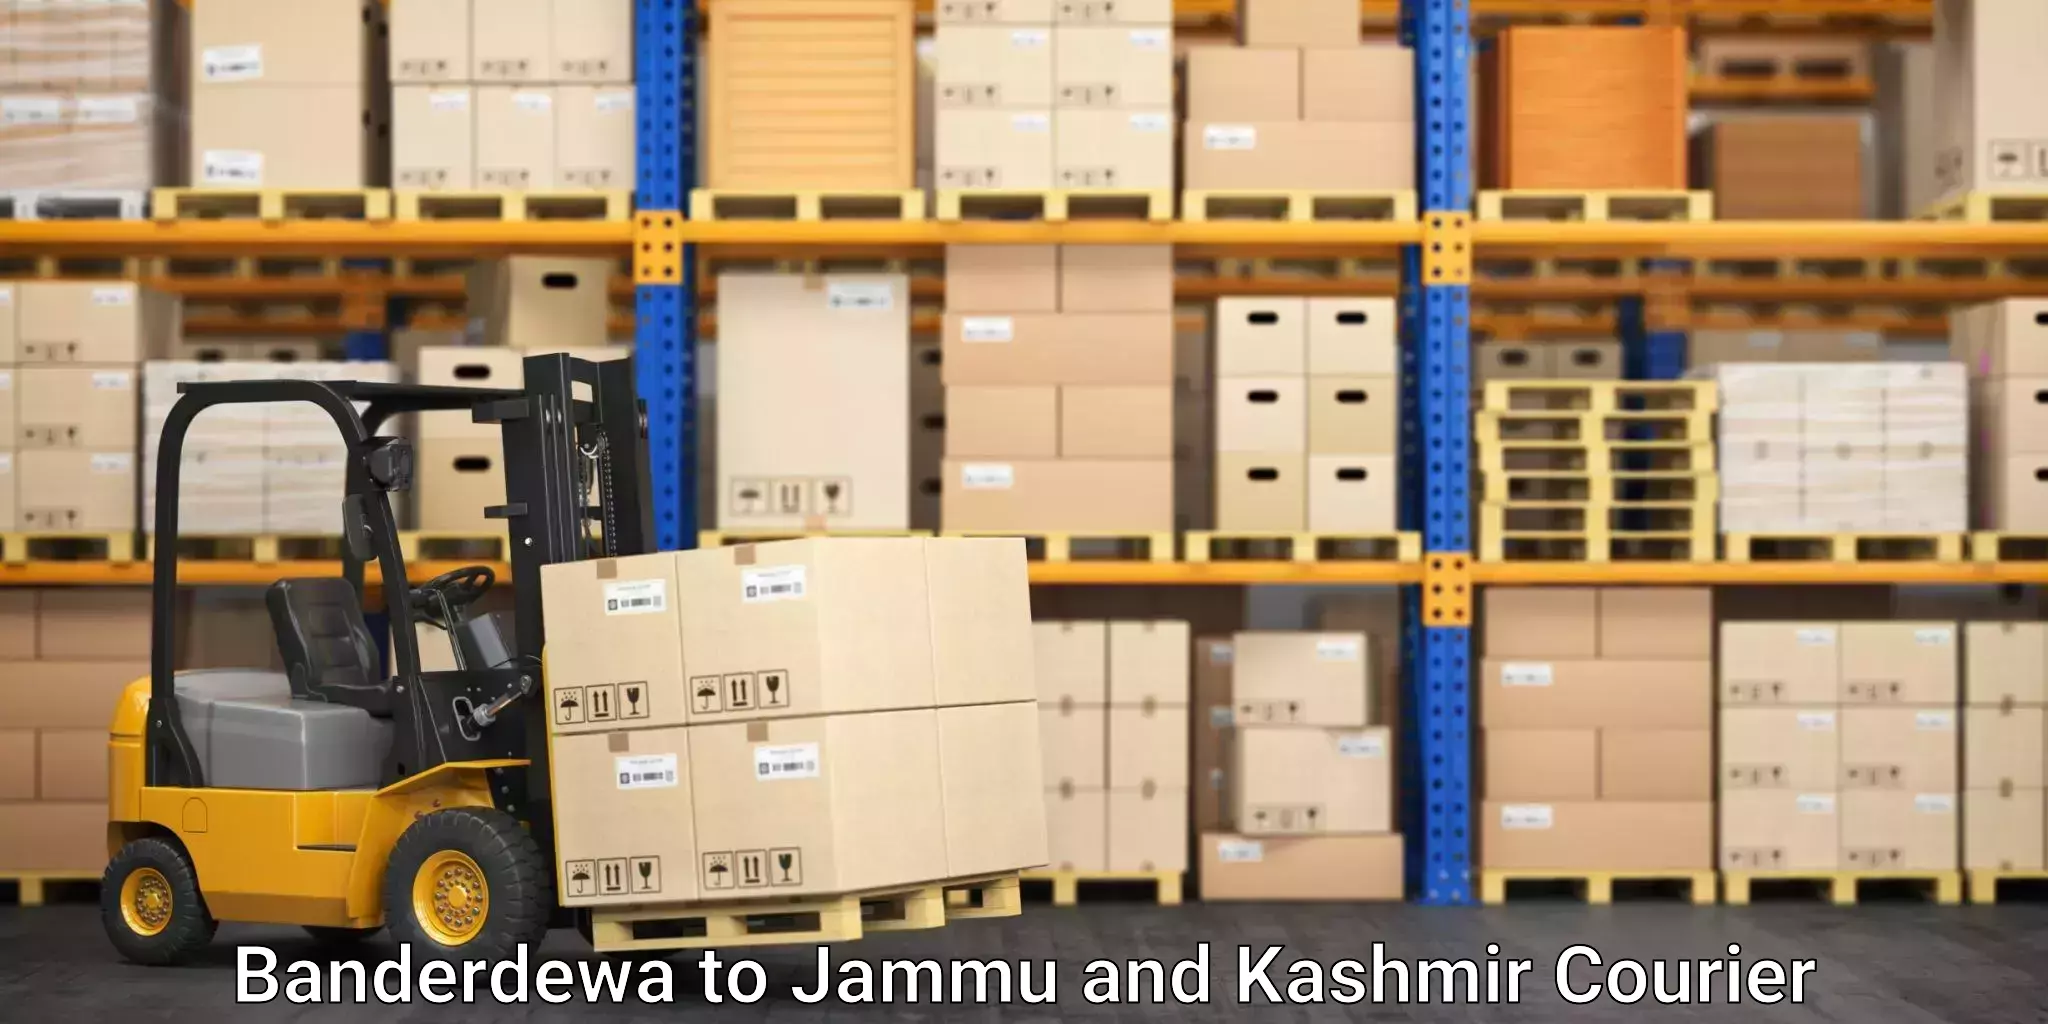 Parcel handling and care in Banderdewa to Baramulla